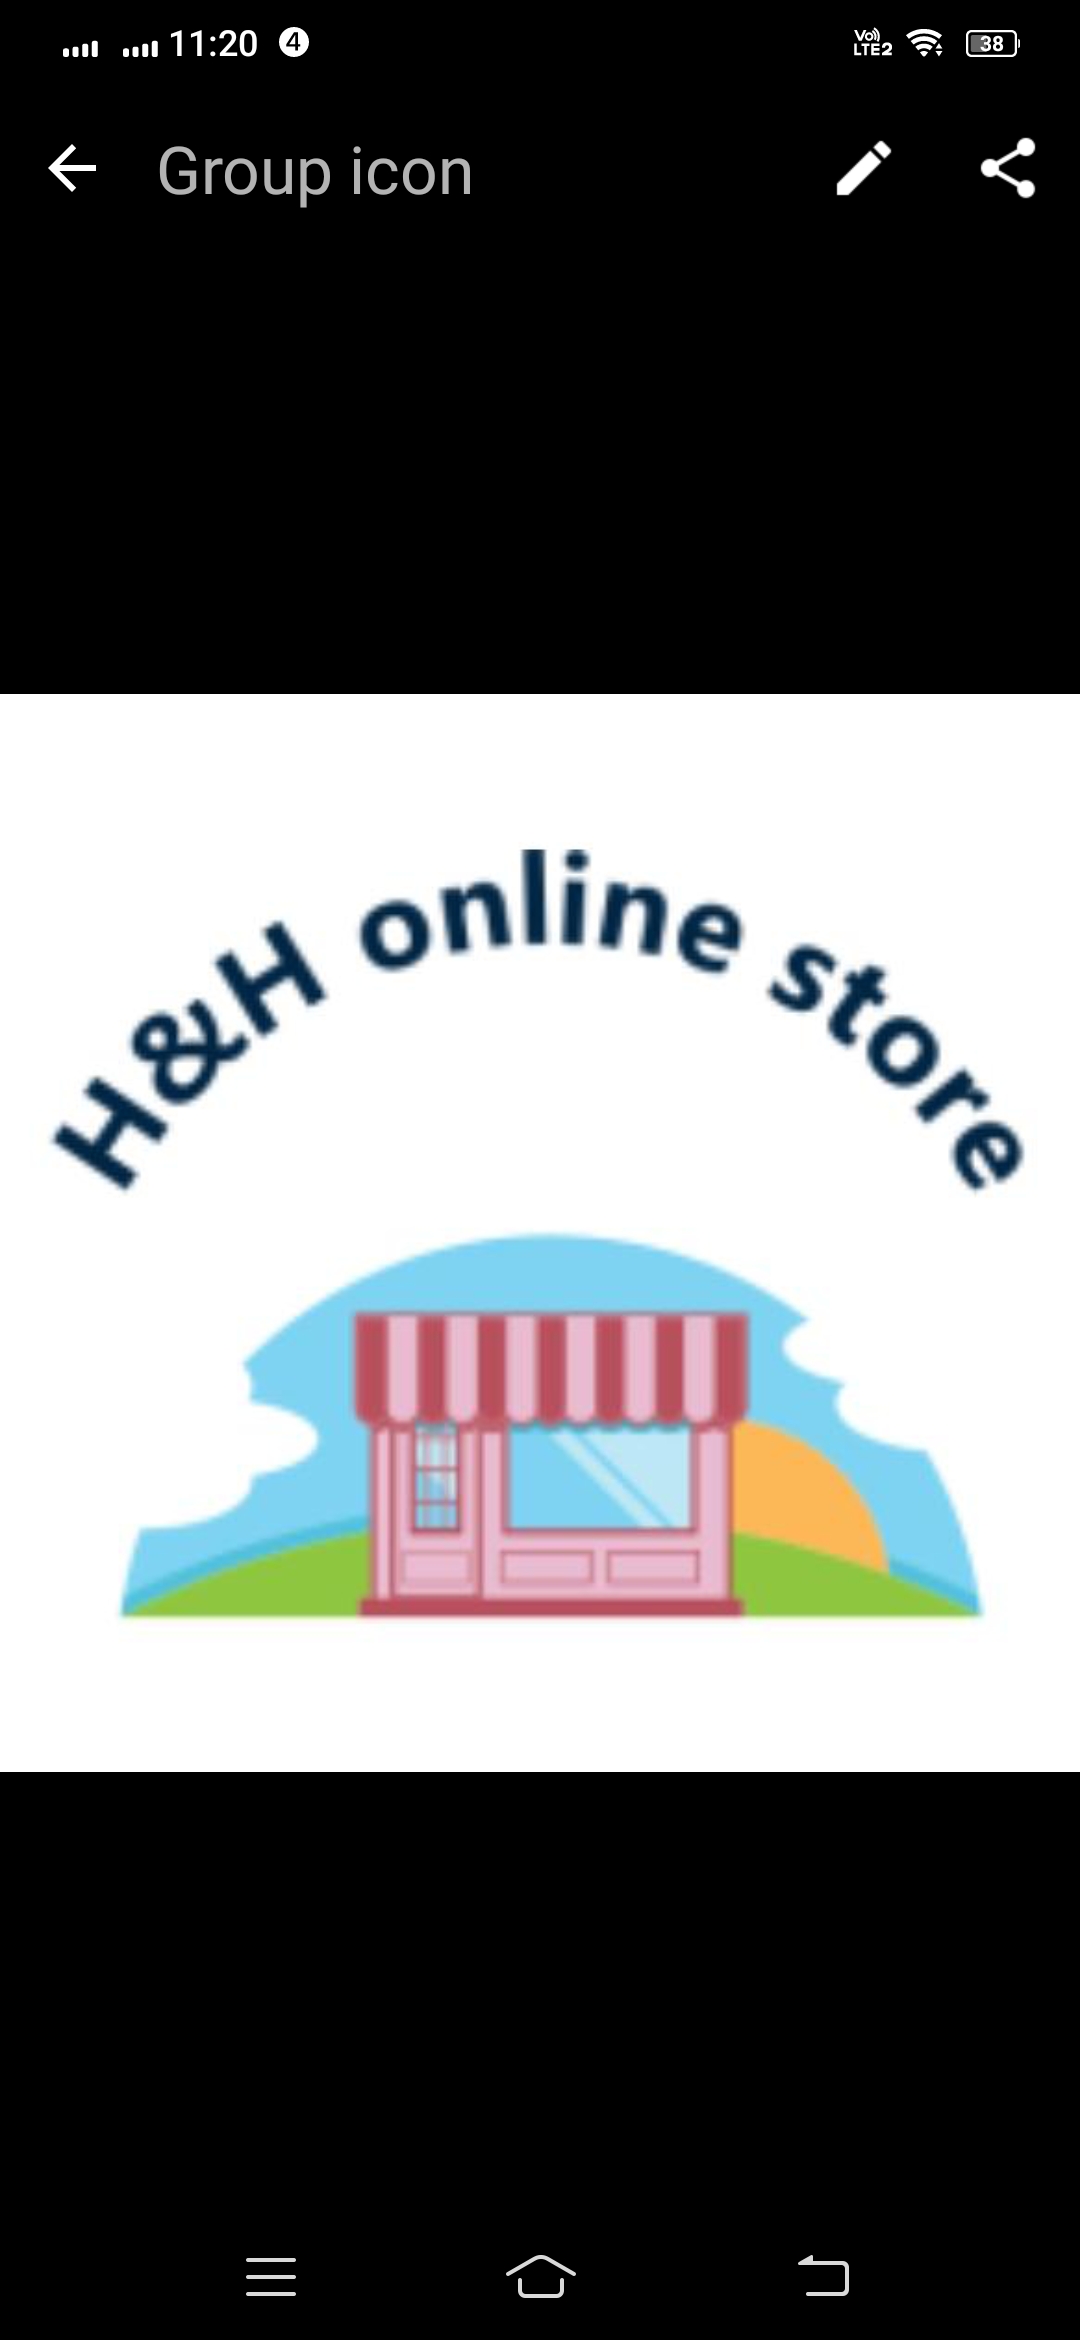 H&H Reliable online store